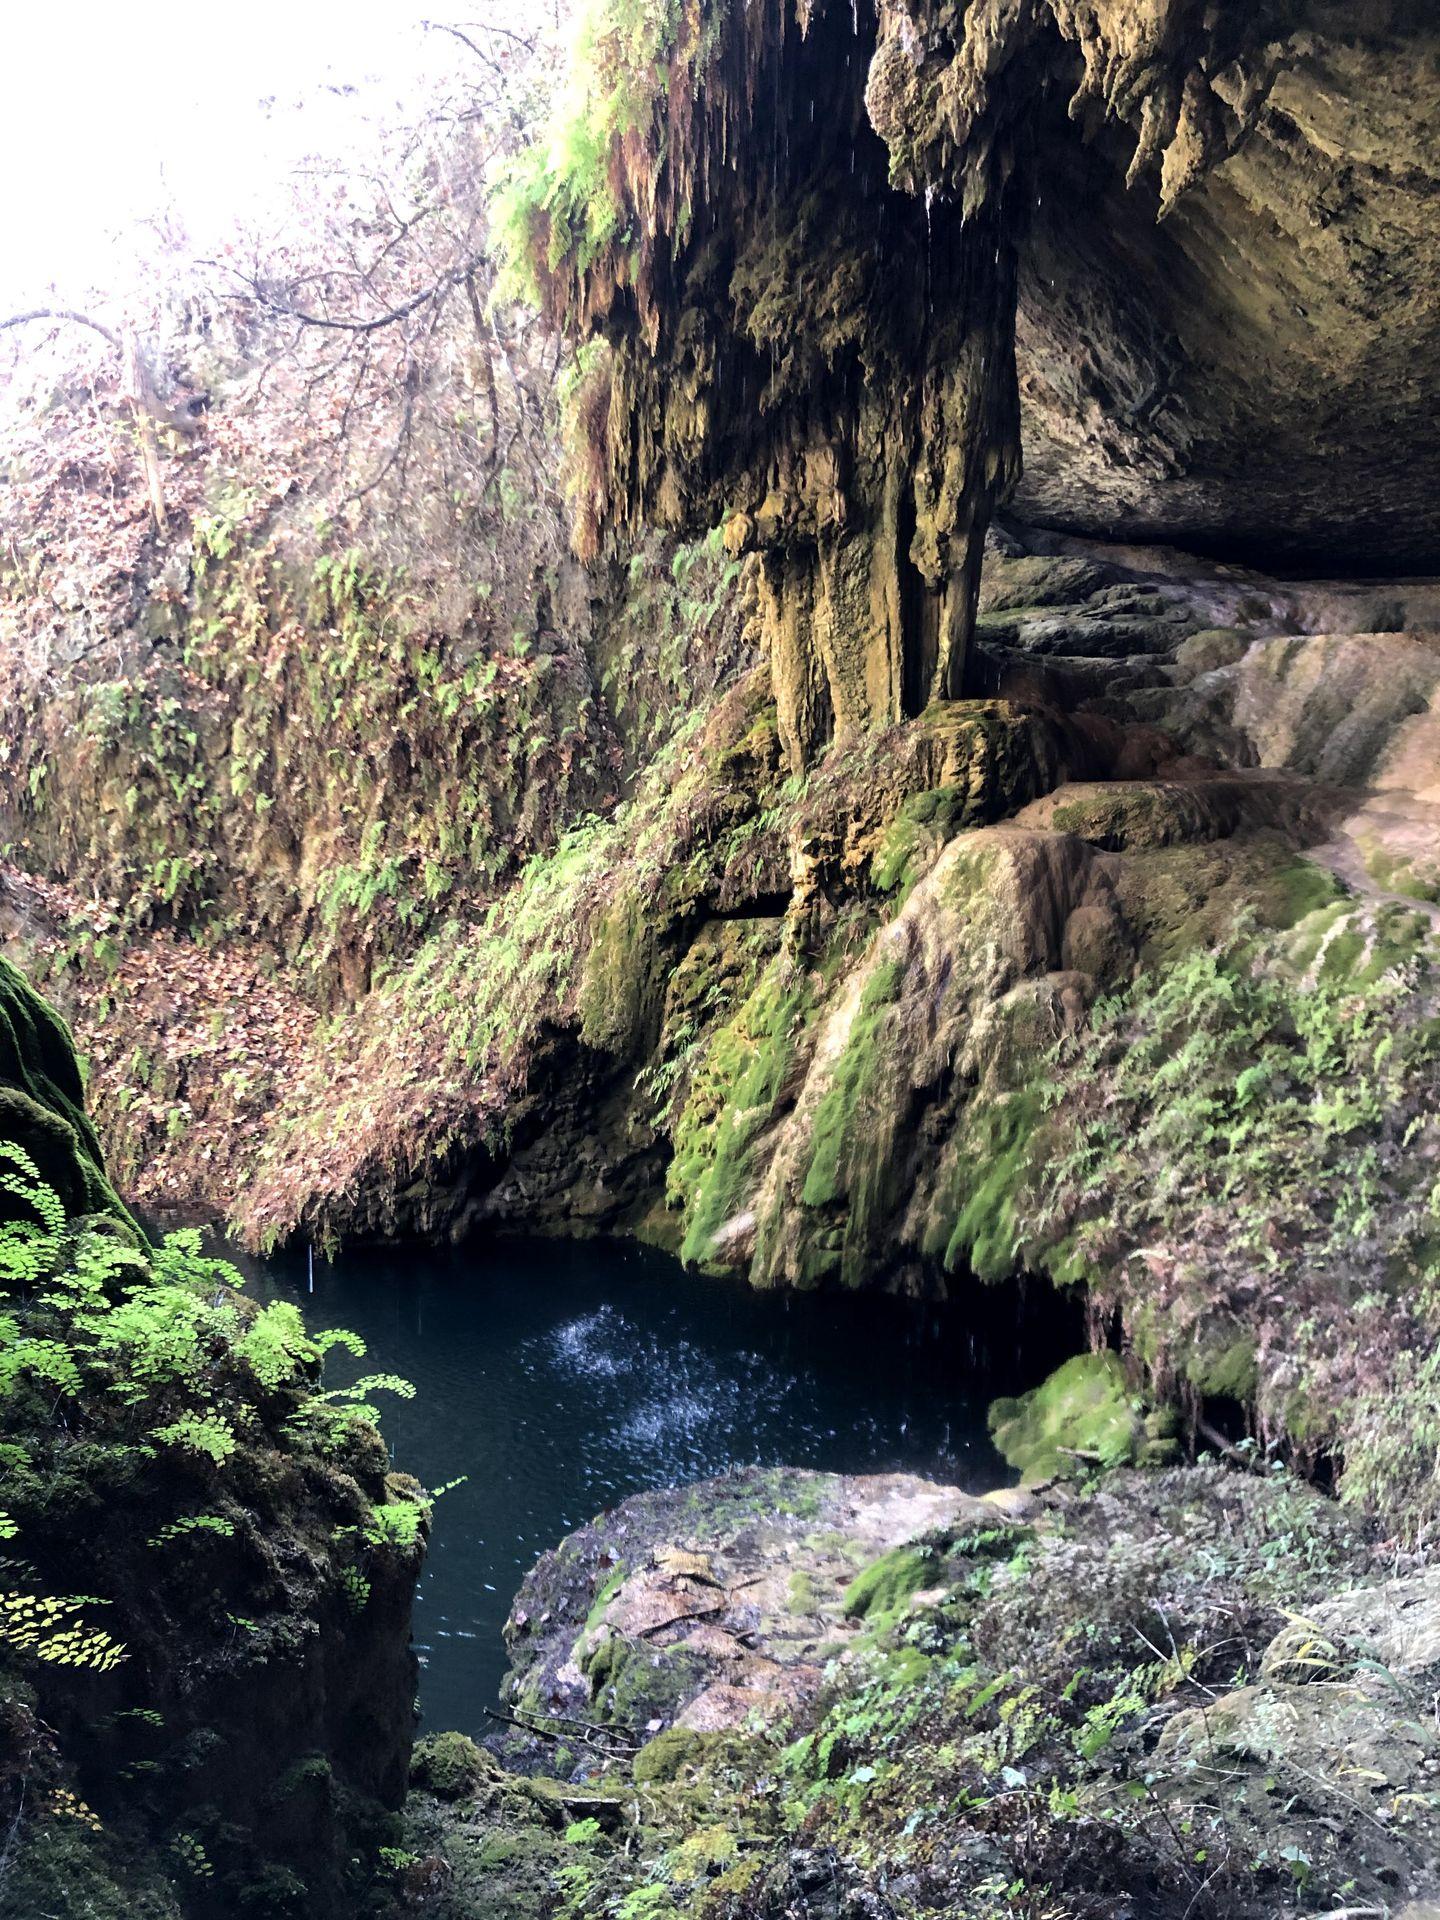 The West Cave grotto, which includes a small pool of water surrounded by green moss.